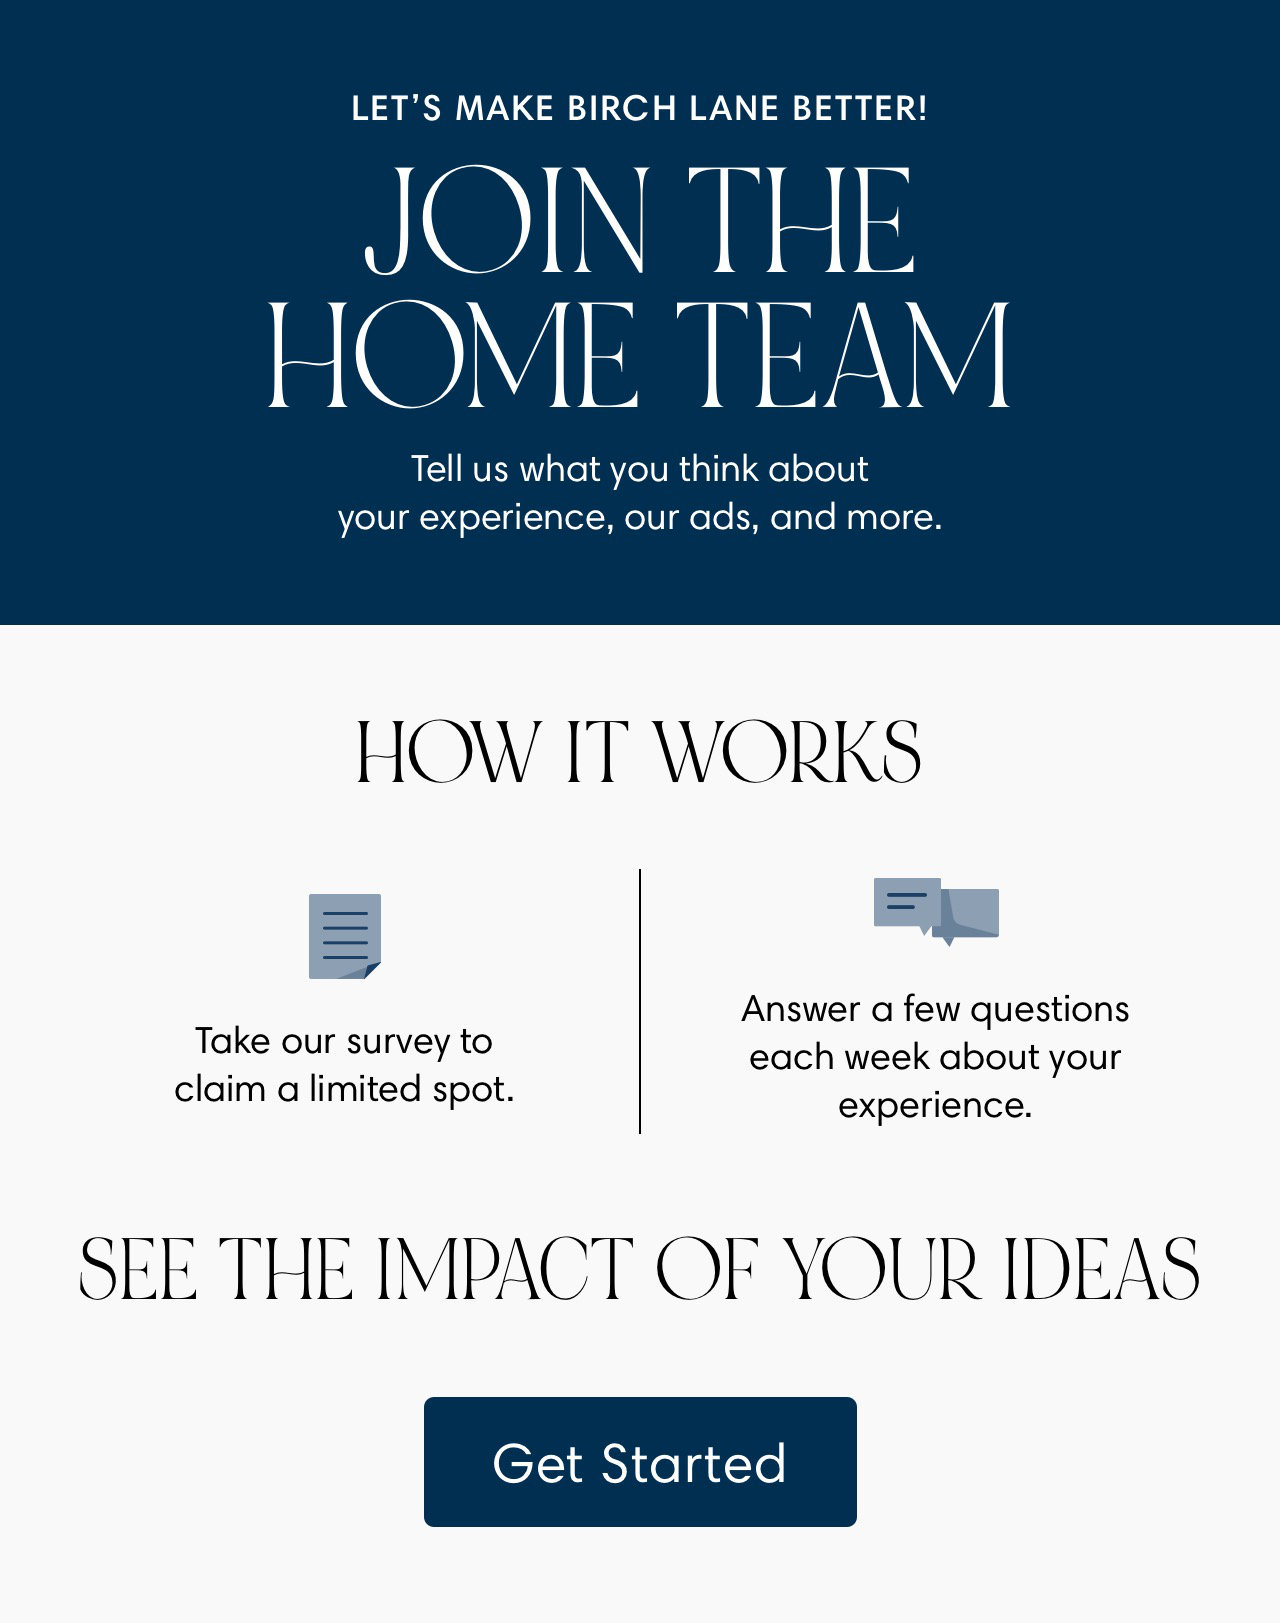 LET'S MAKE BIRCH LANE BETTER! JOIN THE HOME TEAM Tell us what you think about our experience, our ads, and more HOW IT WORKS i Jlil Answer a few questions e our survey to each week about your claim a limited spot. experience. SEE THE IMPACT OF YOUR IDEAS 